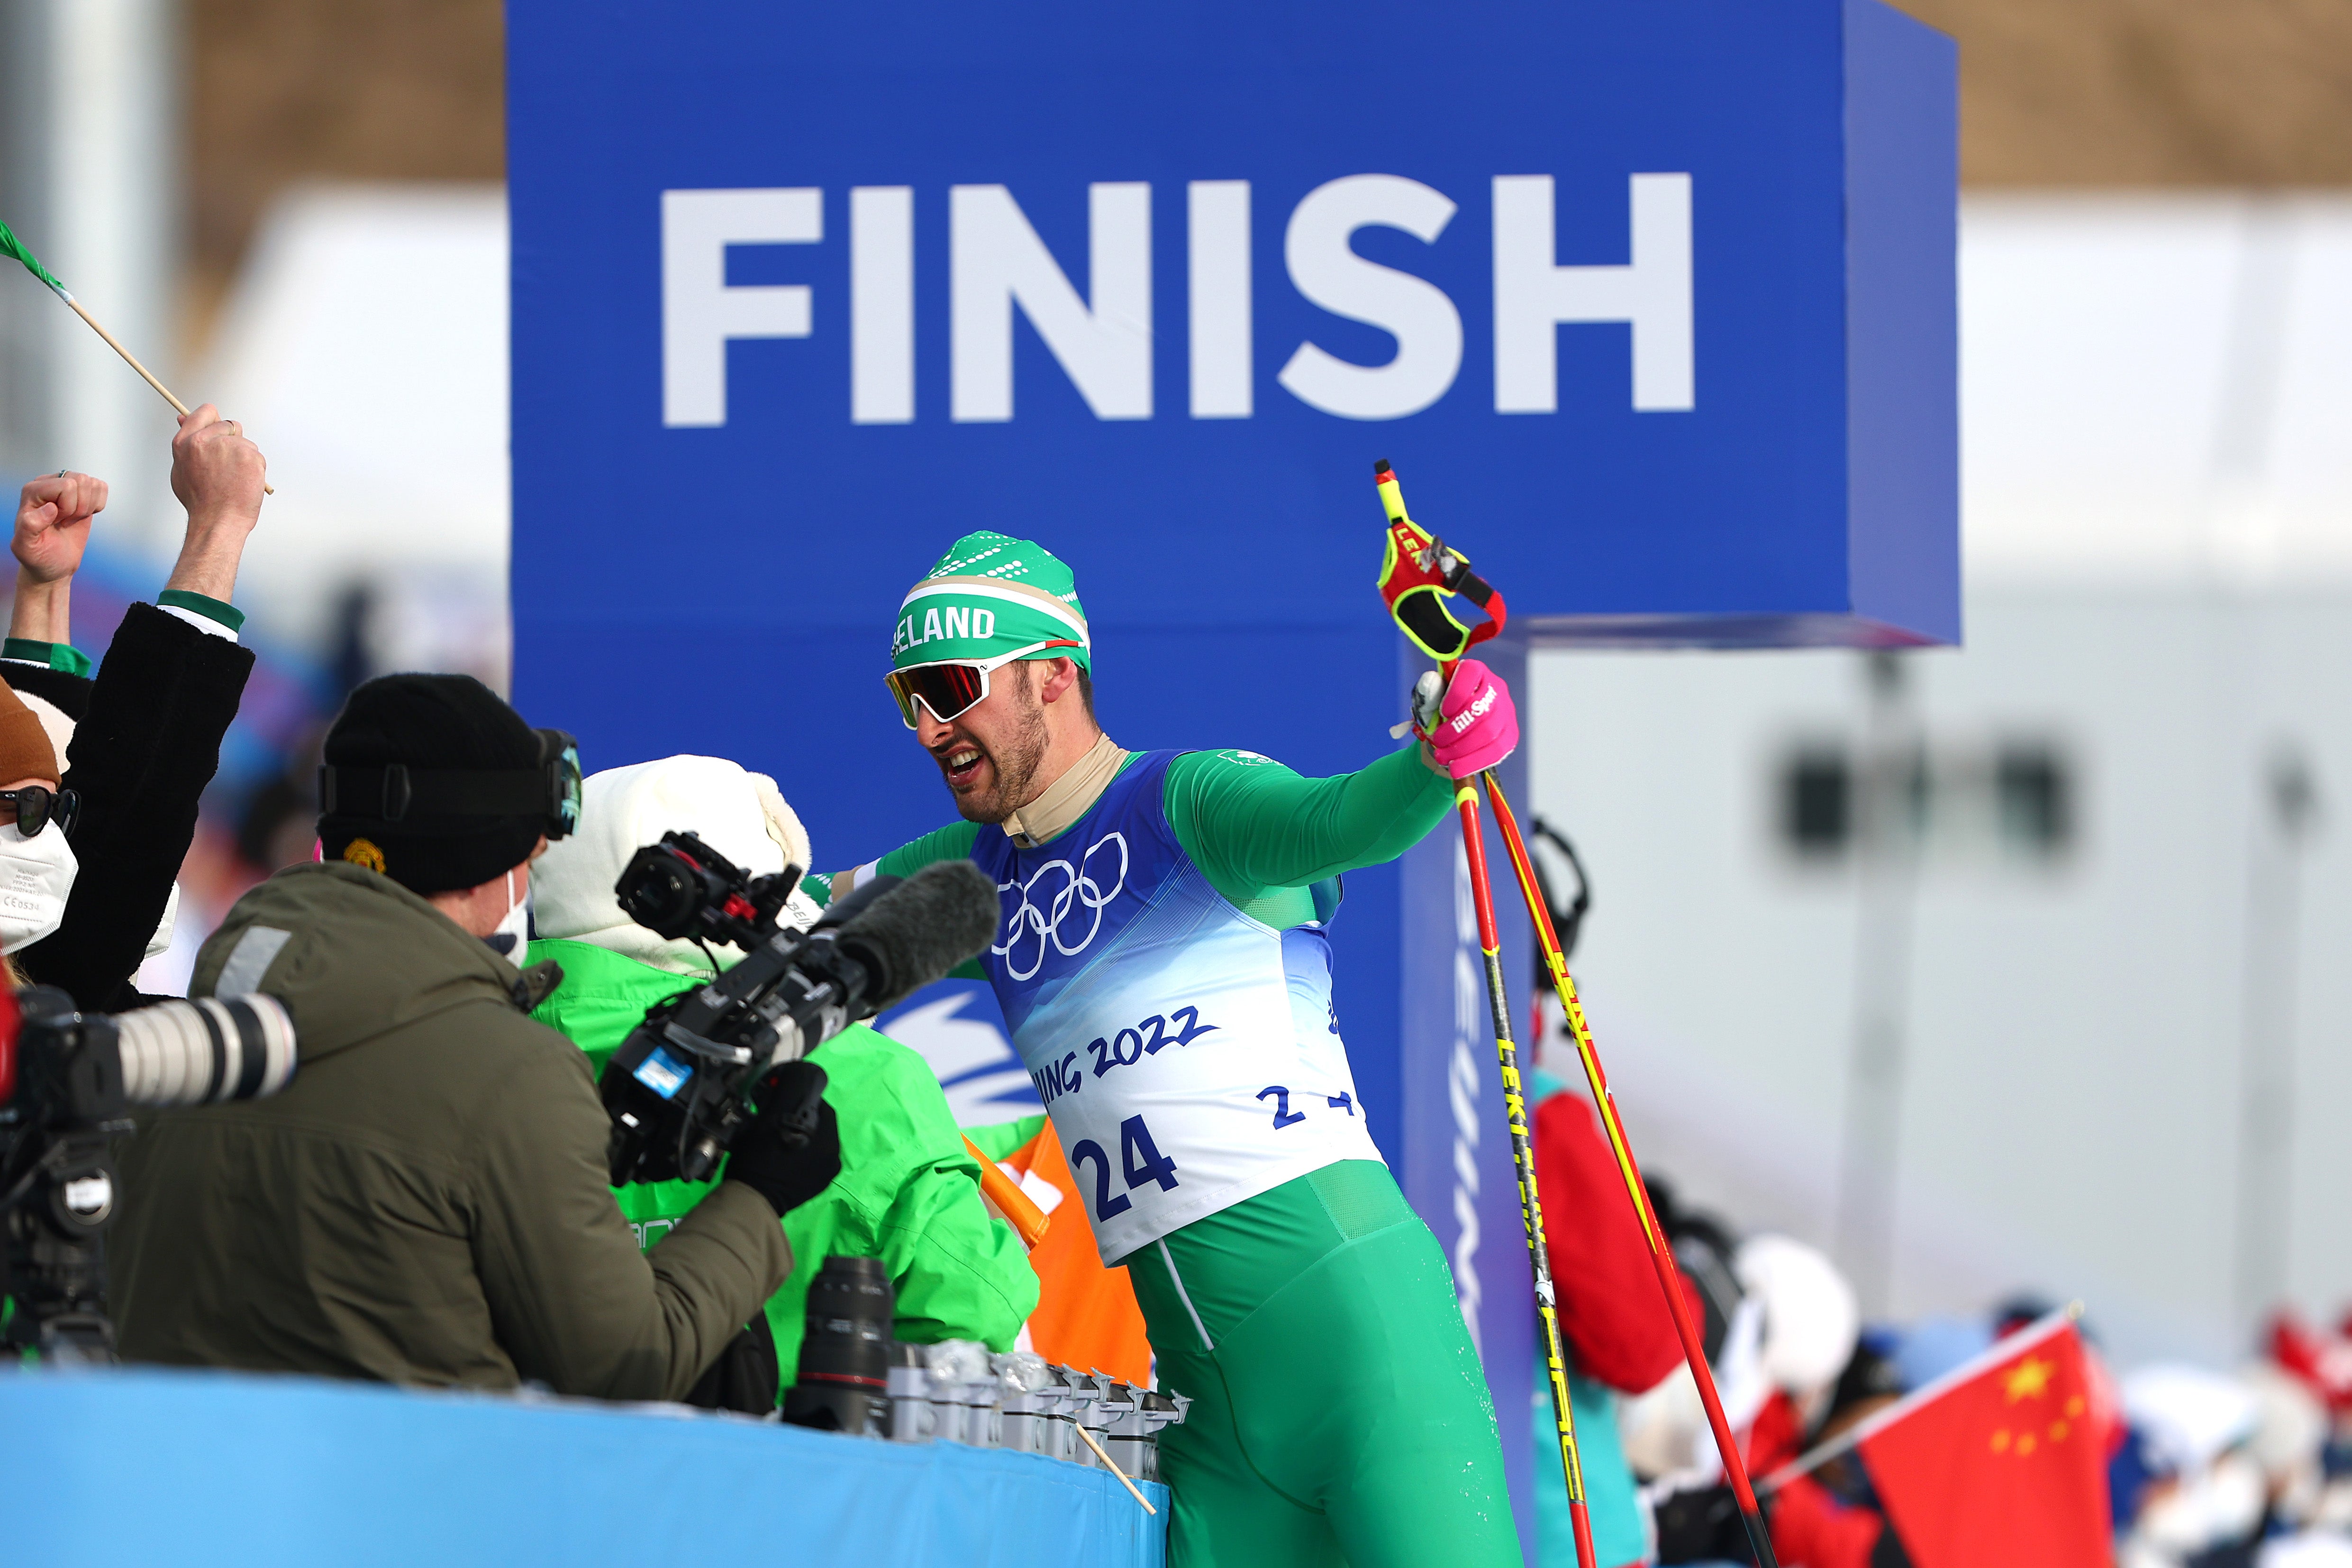 Thomas Maloney Westgaard of Team Ireland reacts with their team after finishing during the Men's Cross-Country Skiing 15km Classic on Day 7 of Beijing 2022 Winter Olympics